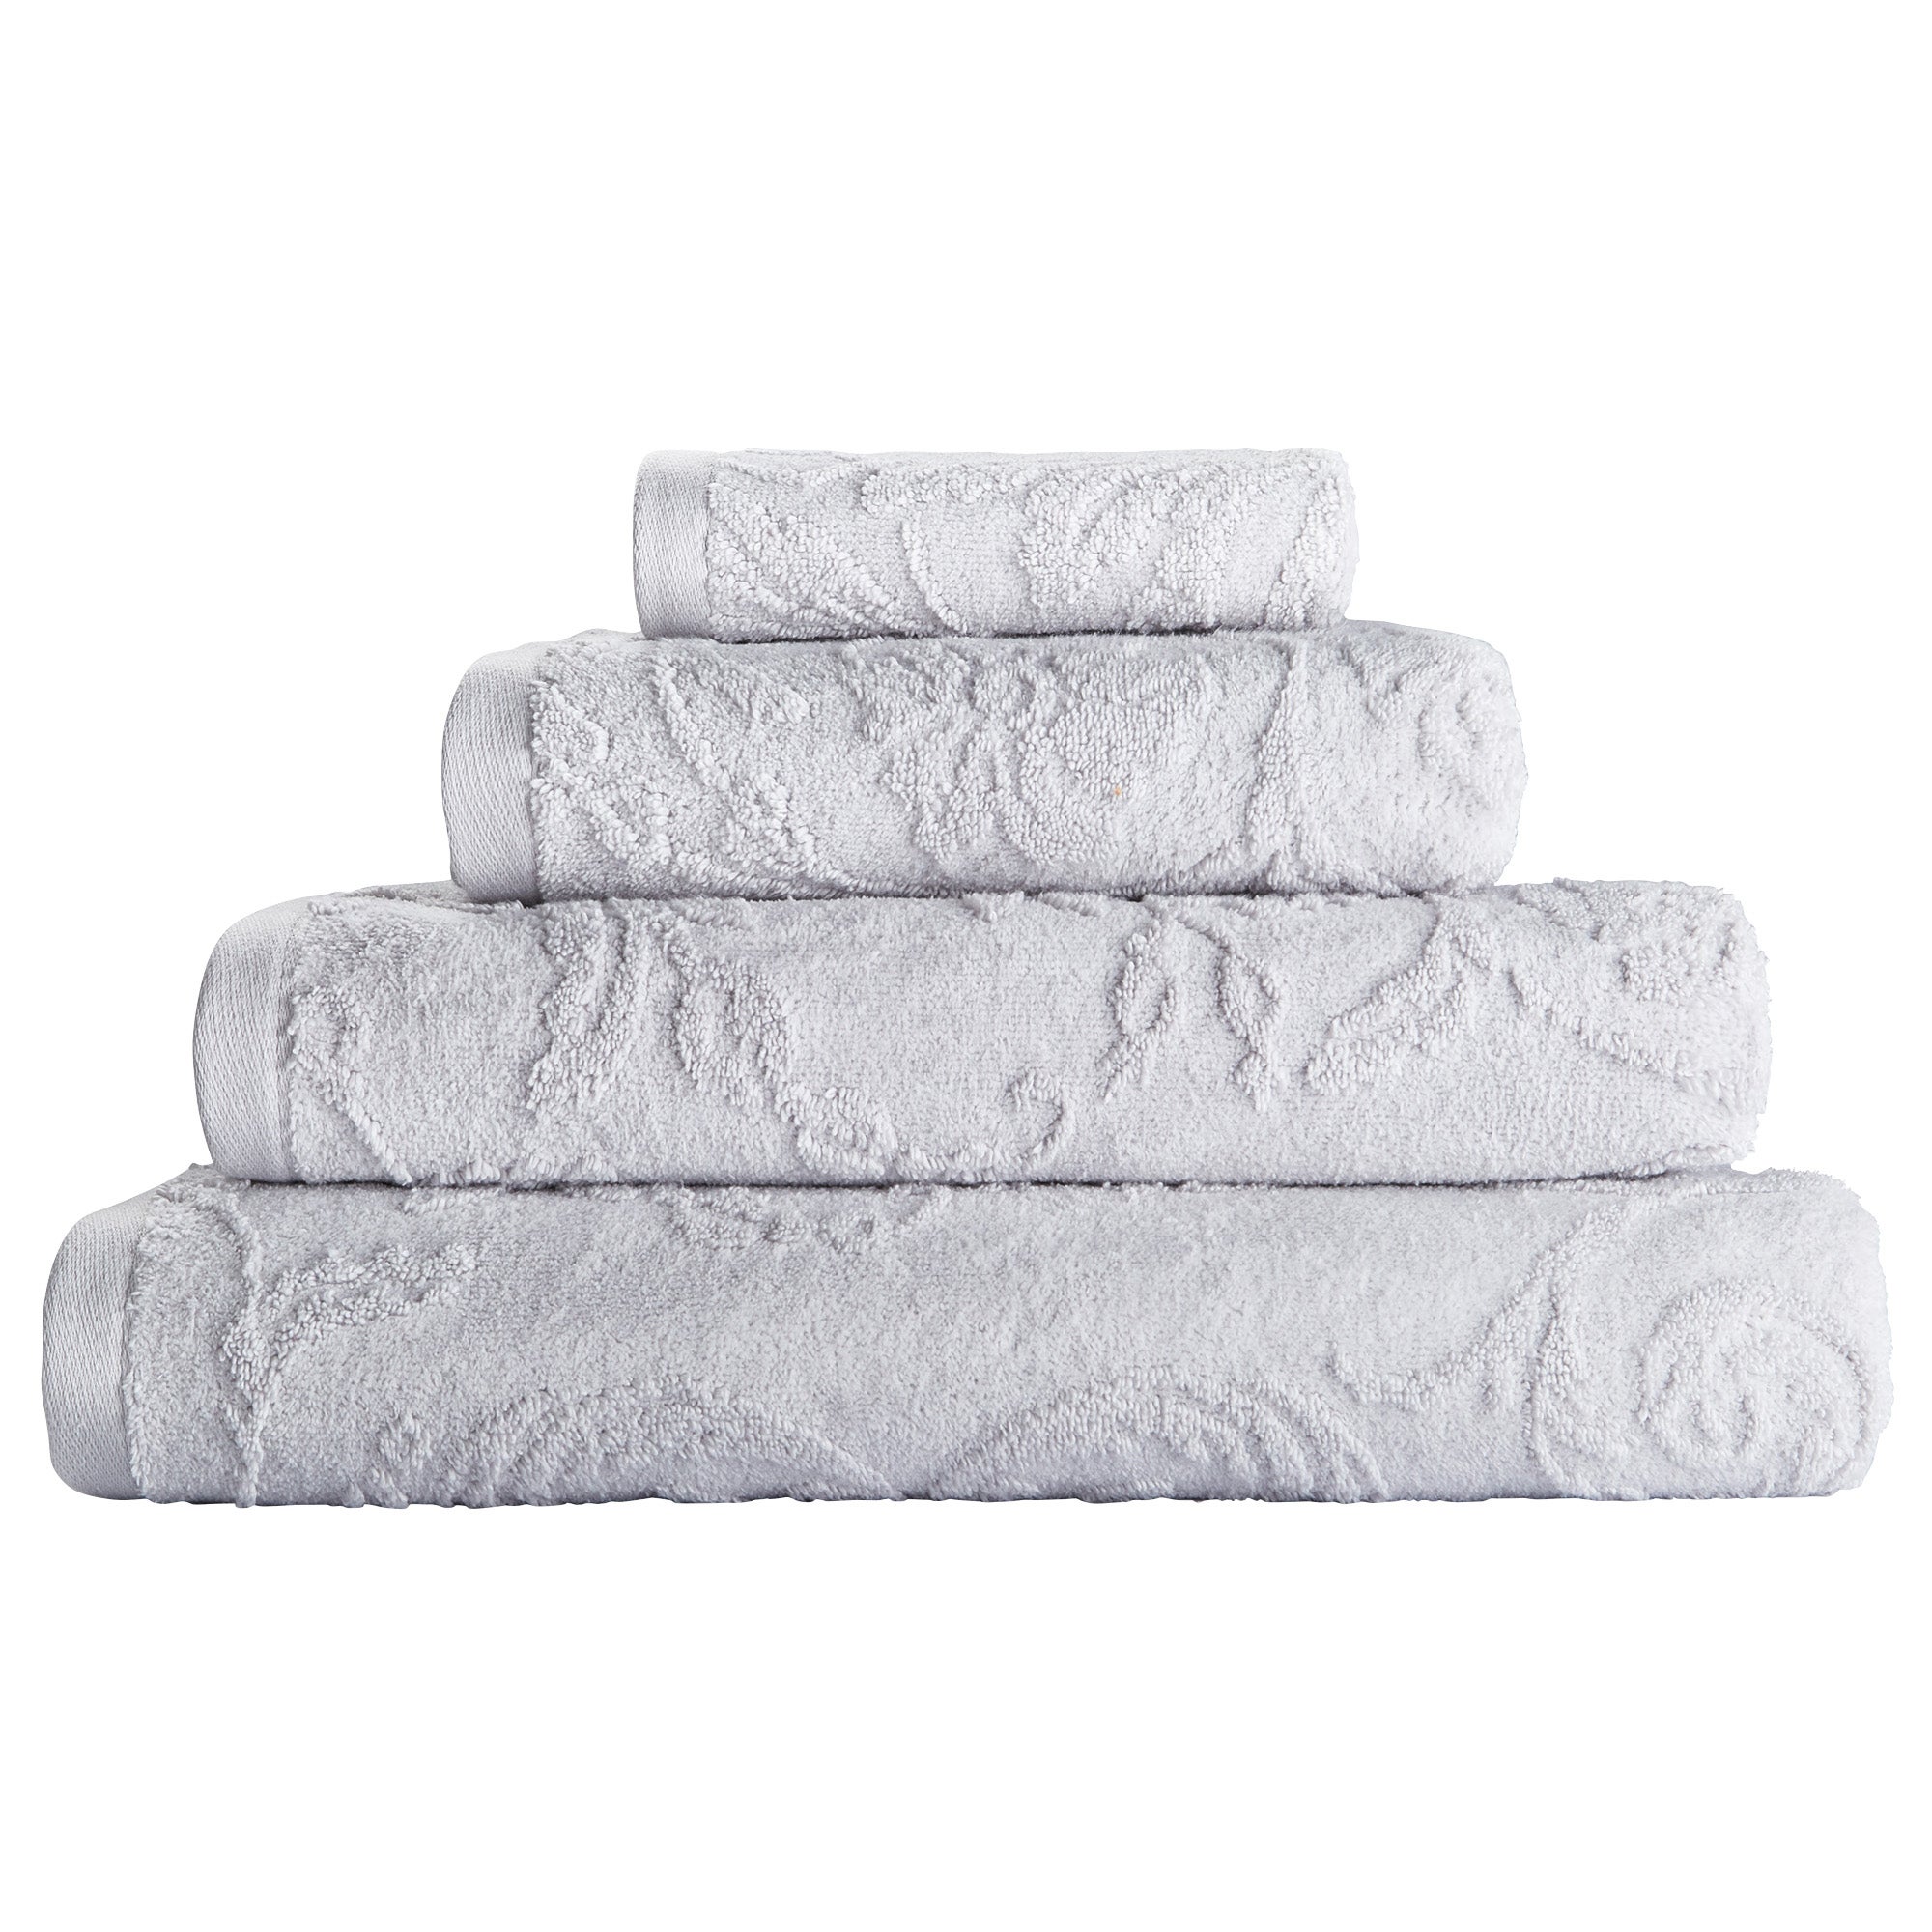 Towels | Hand & Body Towels |Egyptian Cotton Towels | Dunelm - Page 2